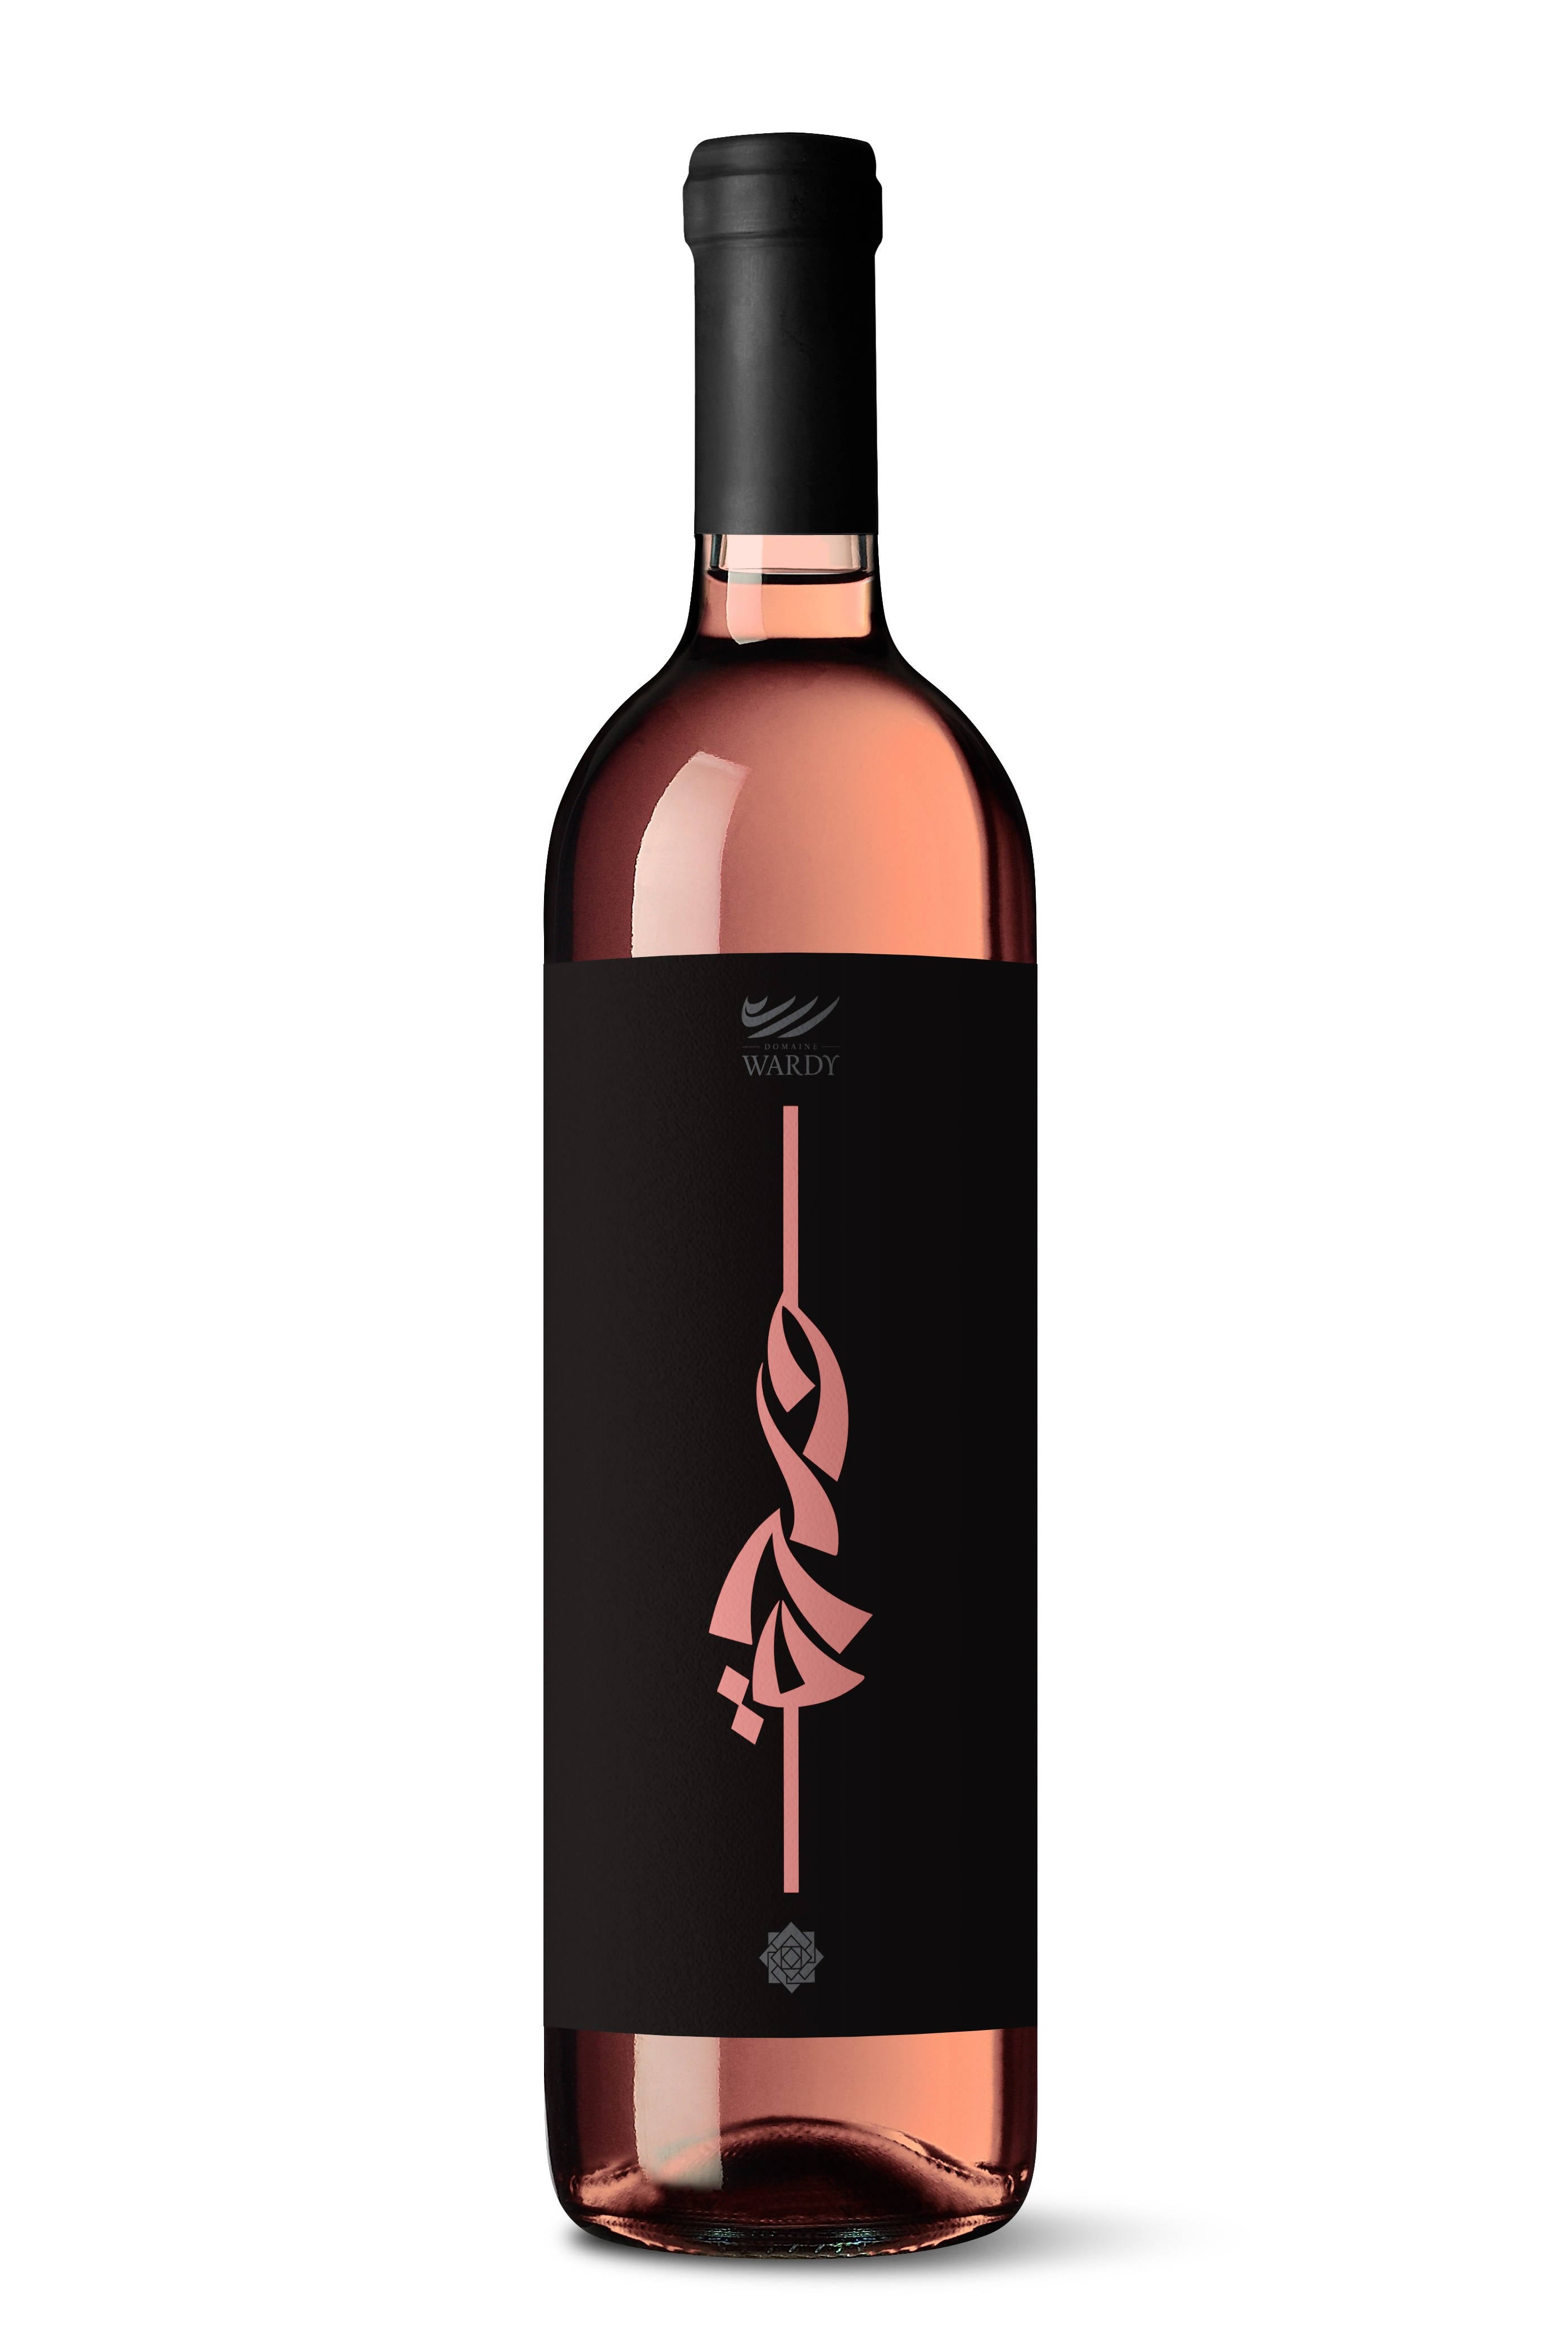 DOMAINE WARDY - BEQAA VALLEY ROSE 2018